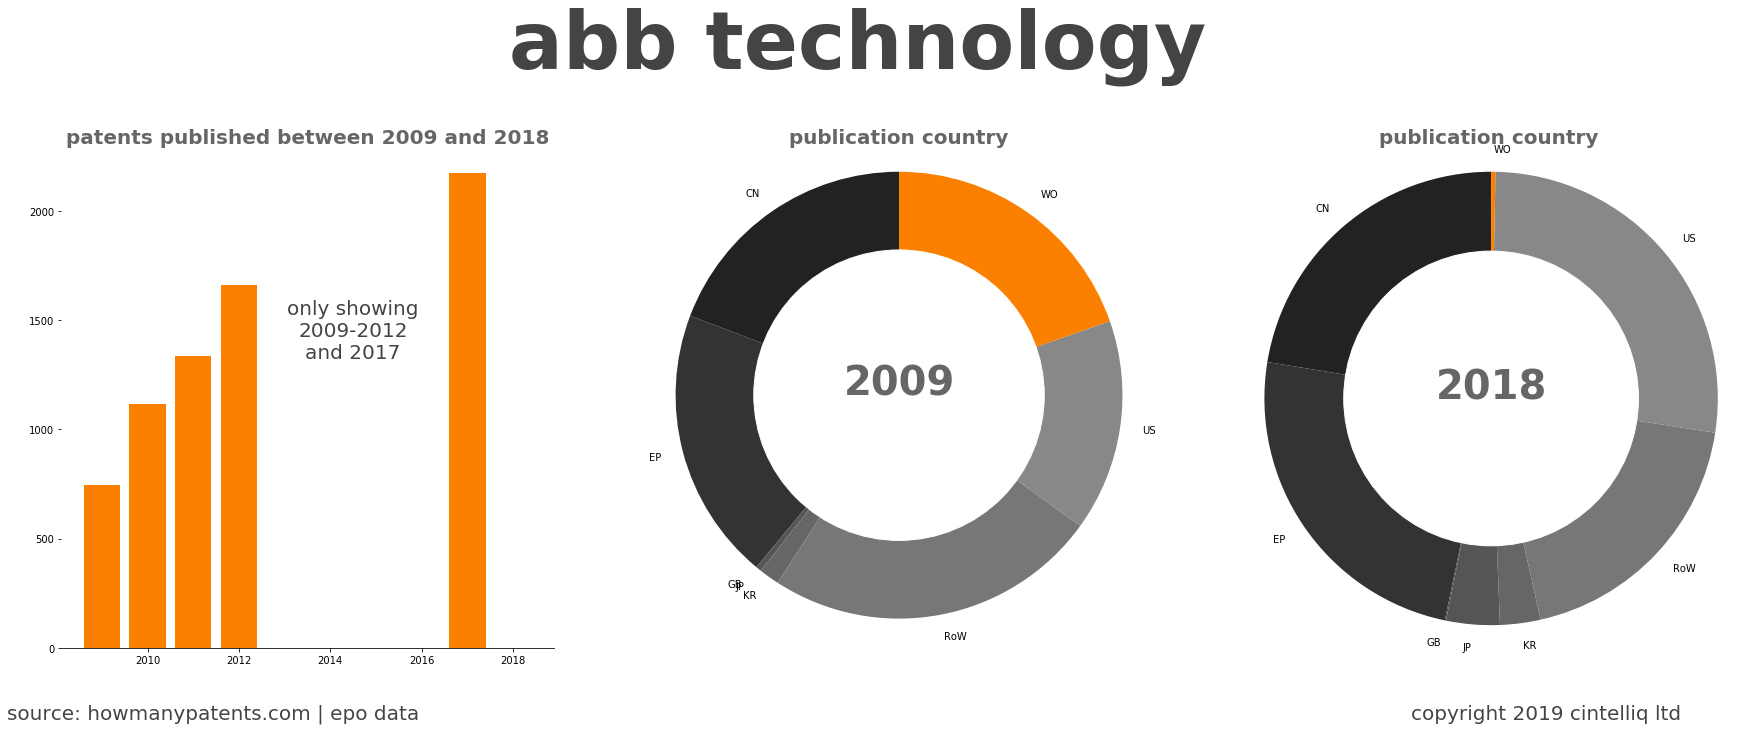 summary of patents for Abb Technology 